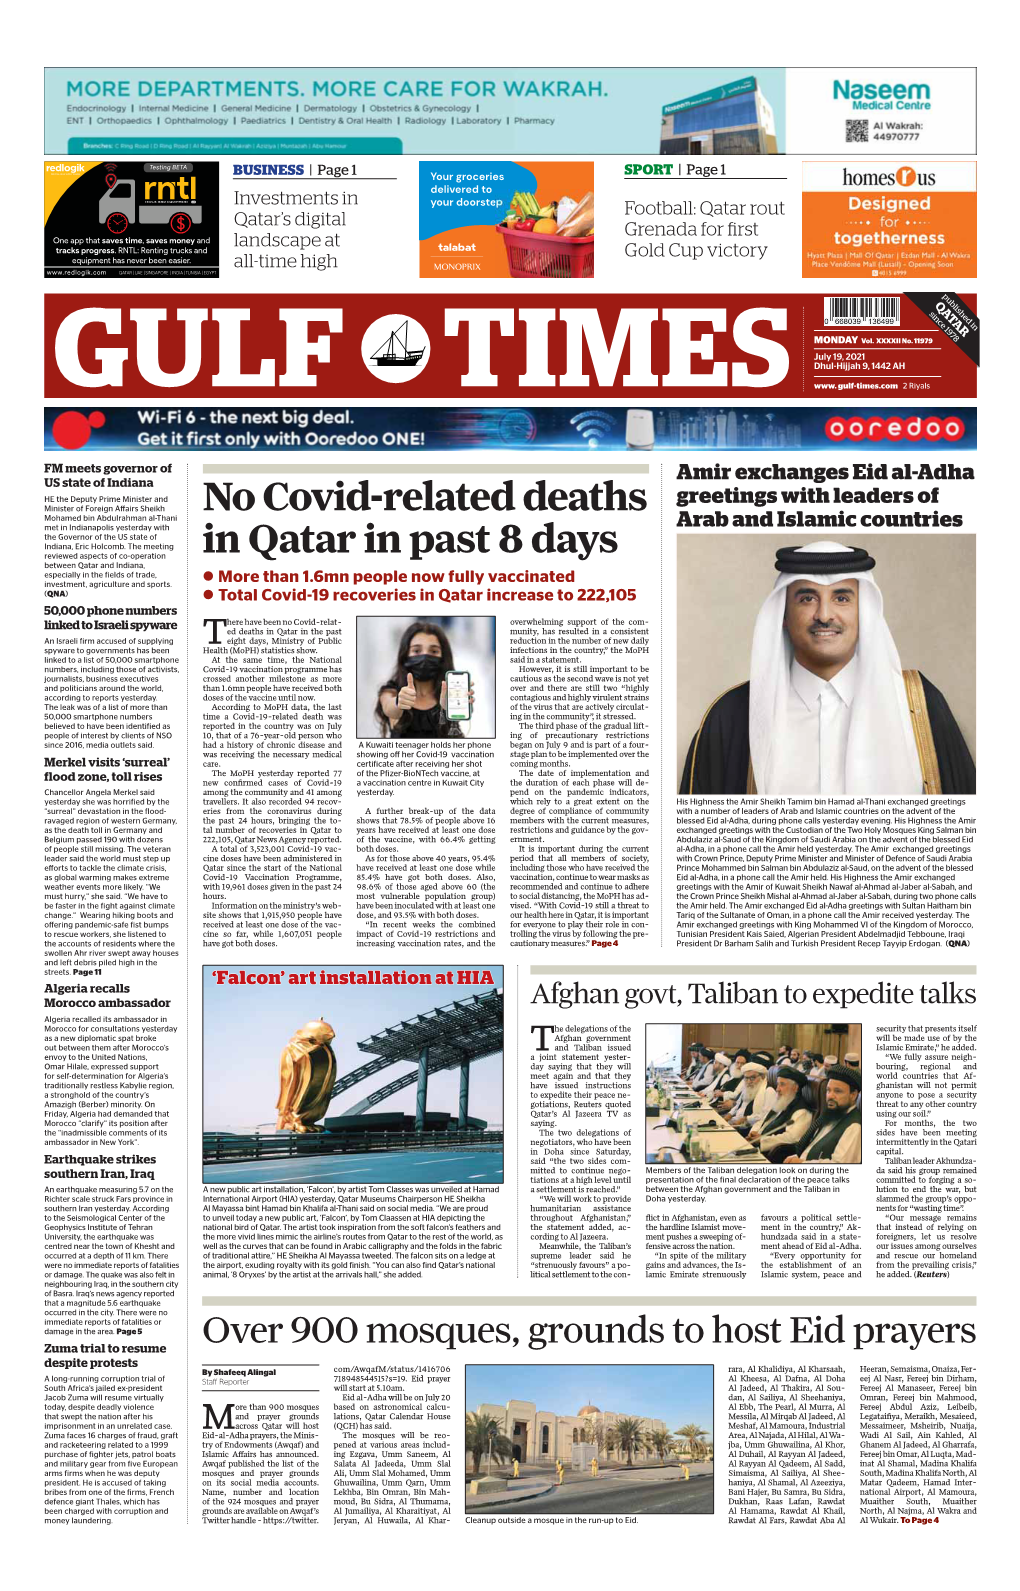 No Covid-Related Deaths in Qatar in Past 8 Days